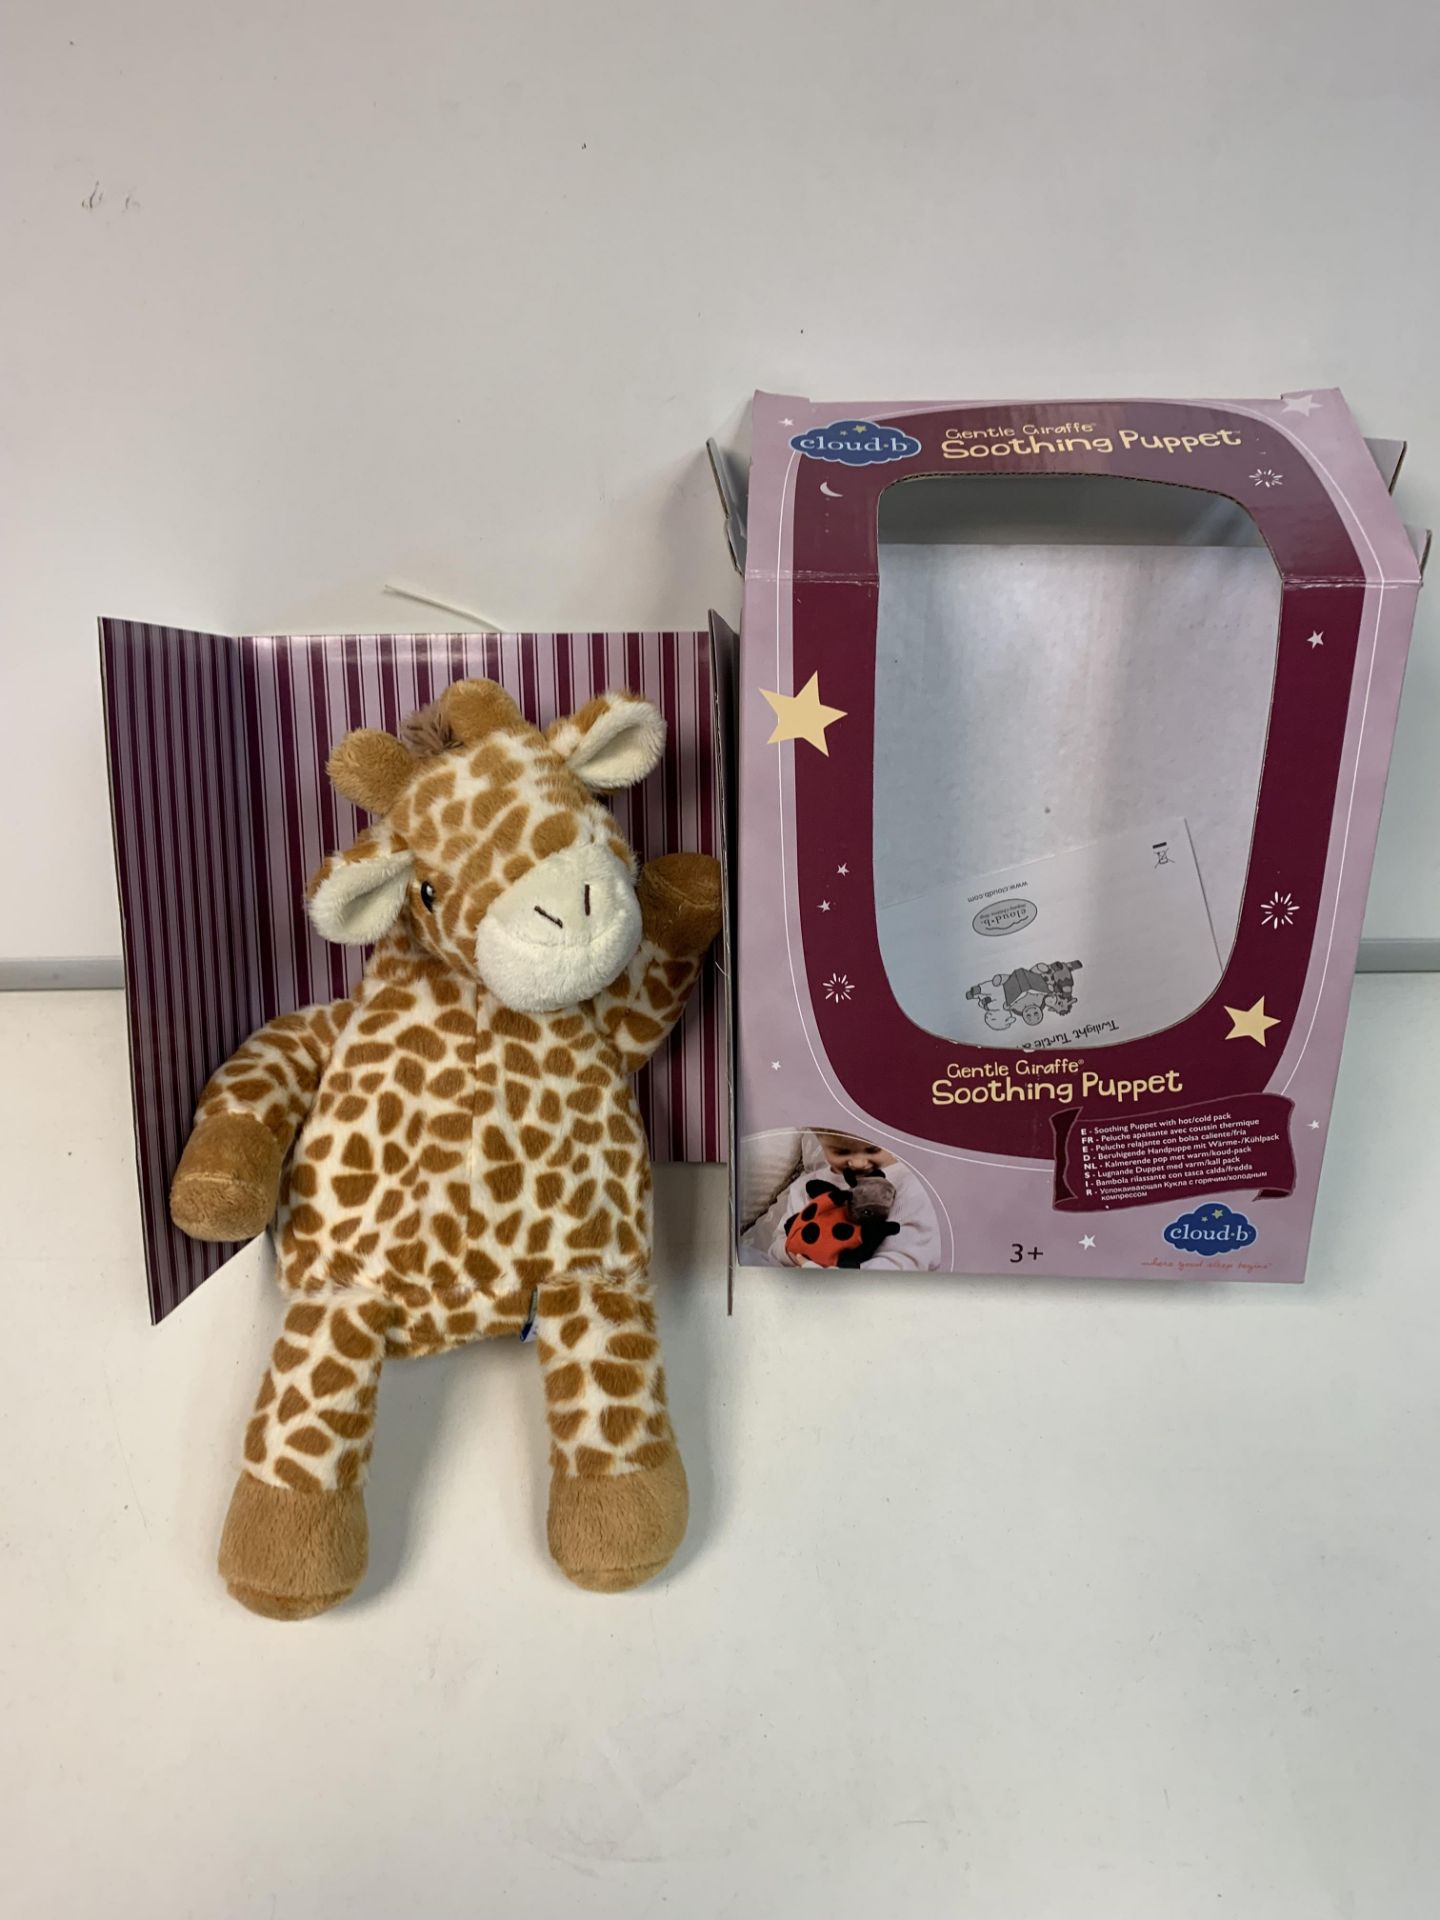 6 X NEW BOXED CLOUD-B TWILIGHT GIRAFFE SOOTHING PUPPET WITH HOT/COLD PACK. A WARM HUG ON A COLD